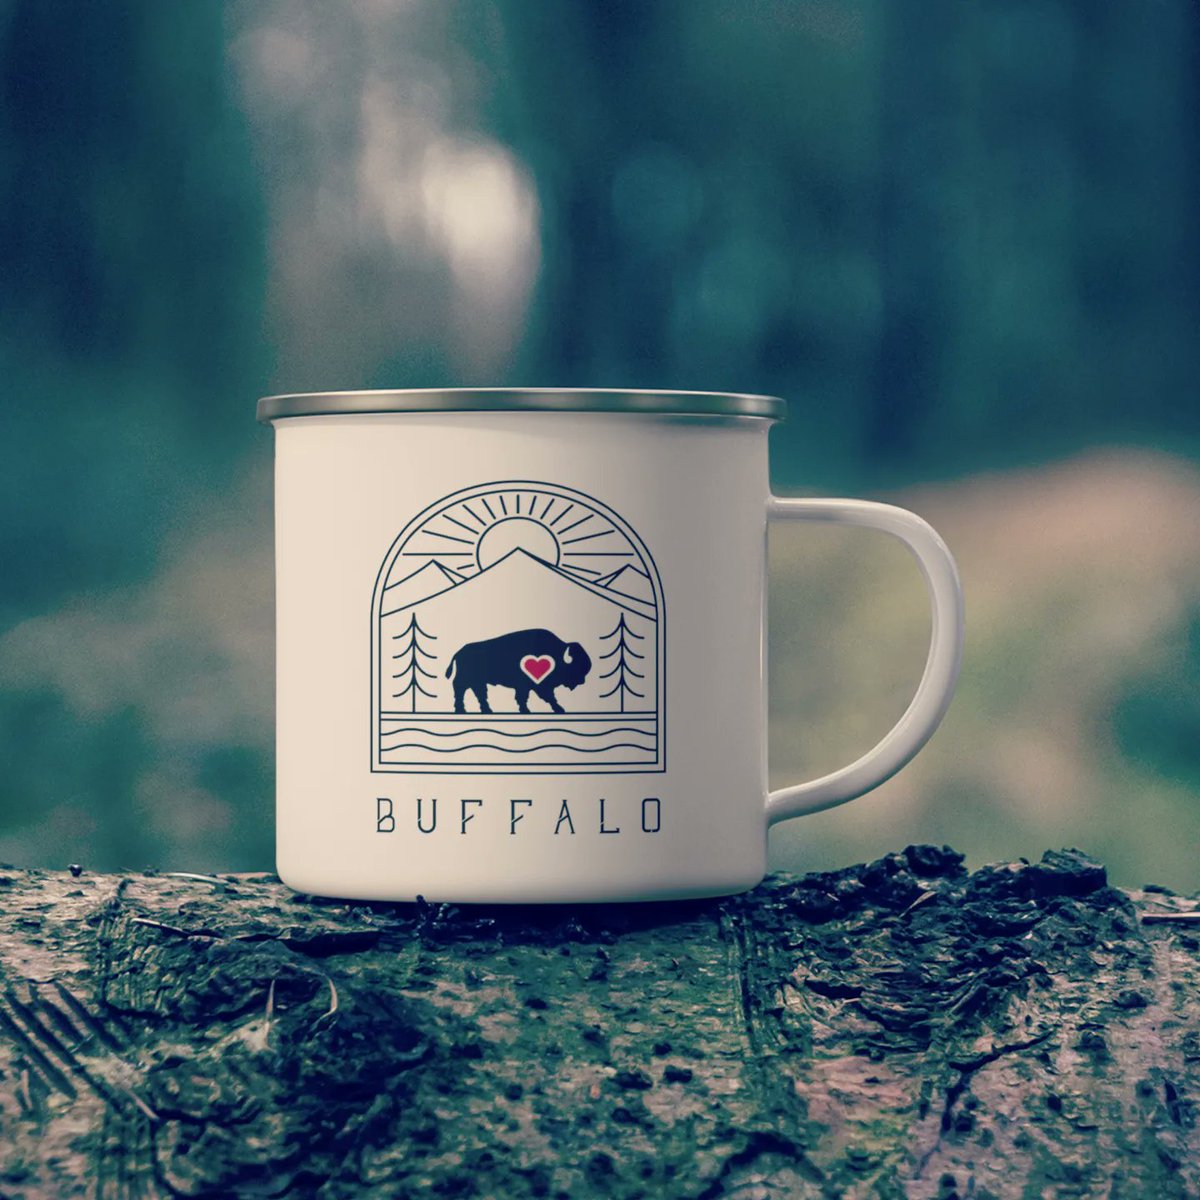 #buffalo Meet your next go-to #camping enamel #mug that holds 12 ounces of your favorite beverage. 

Makes a perfect #gift for anyone!

#outdoors #ny #westernny #ValentinesDay #valentines #buffalofan #BuffaloNY